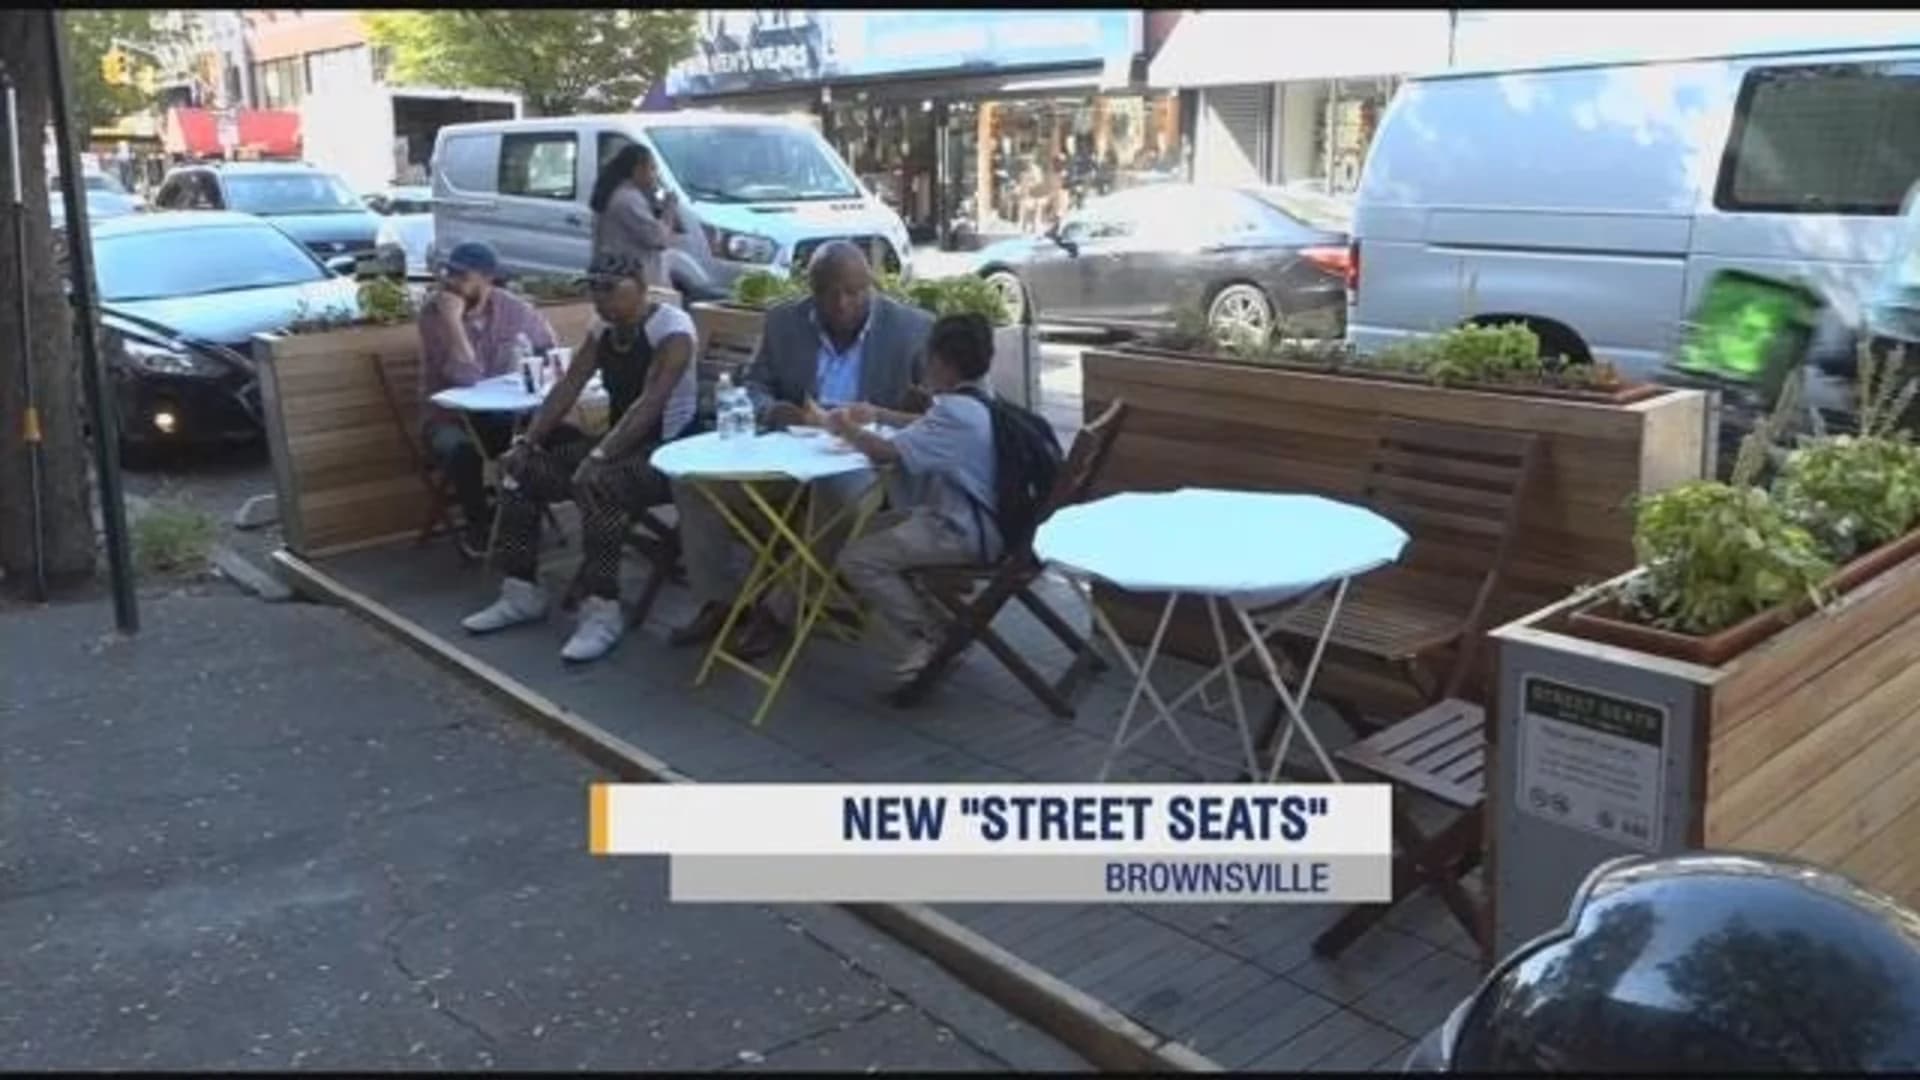 Parking spaces converted into 'street seats' in BK